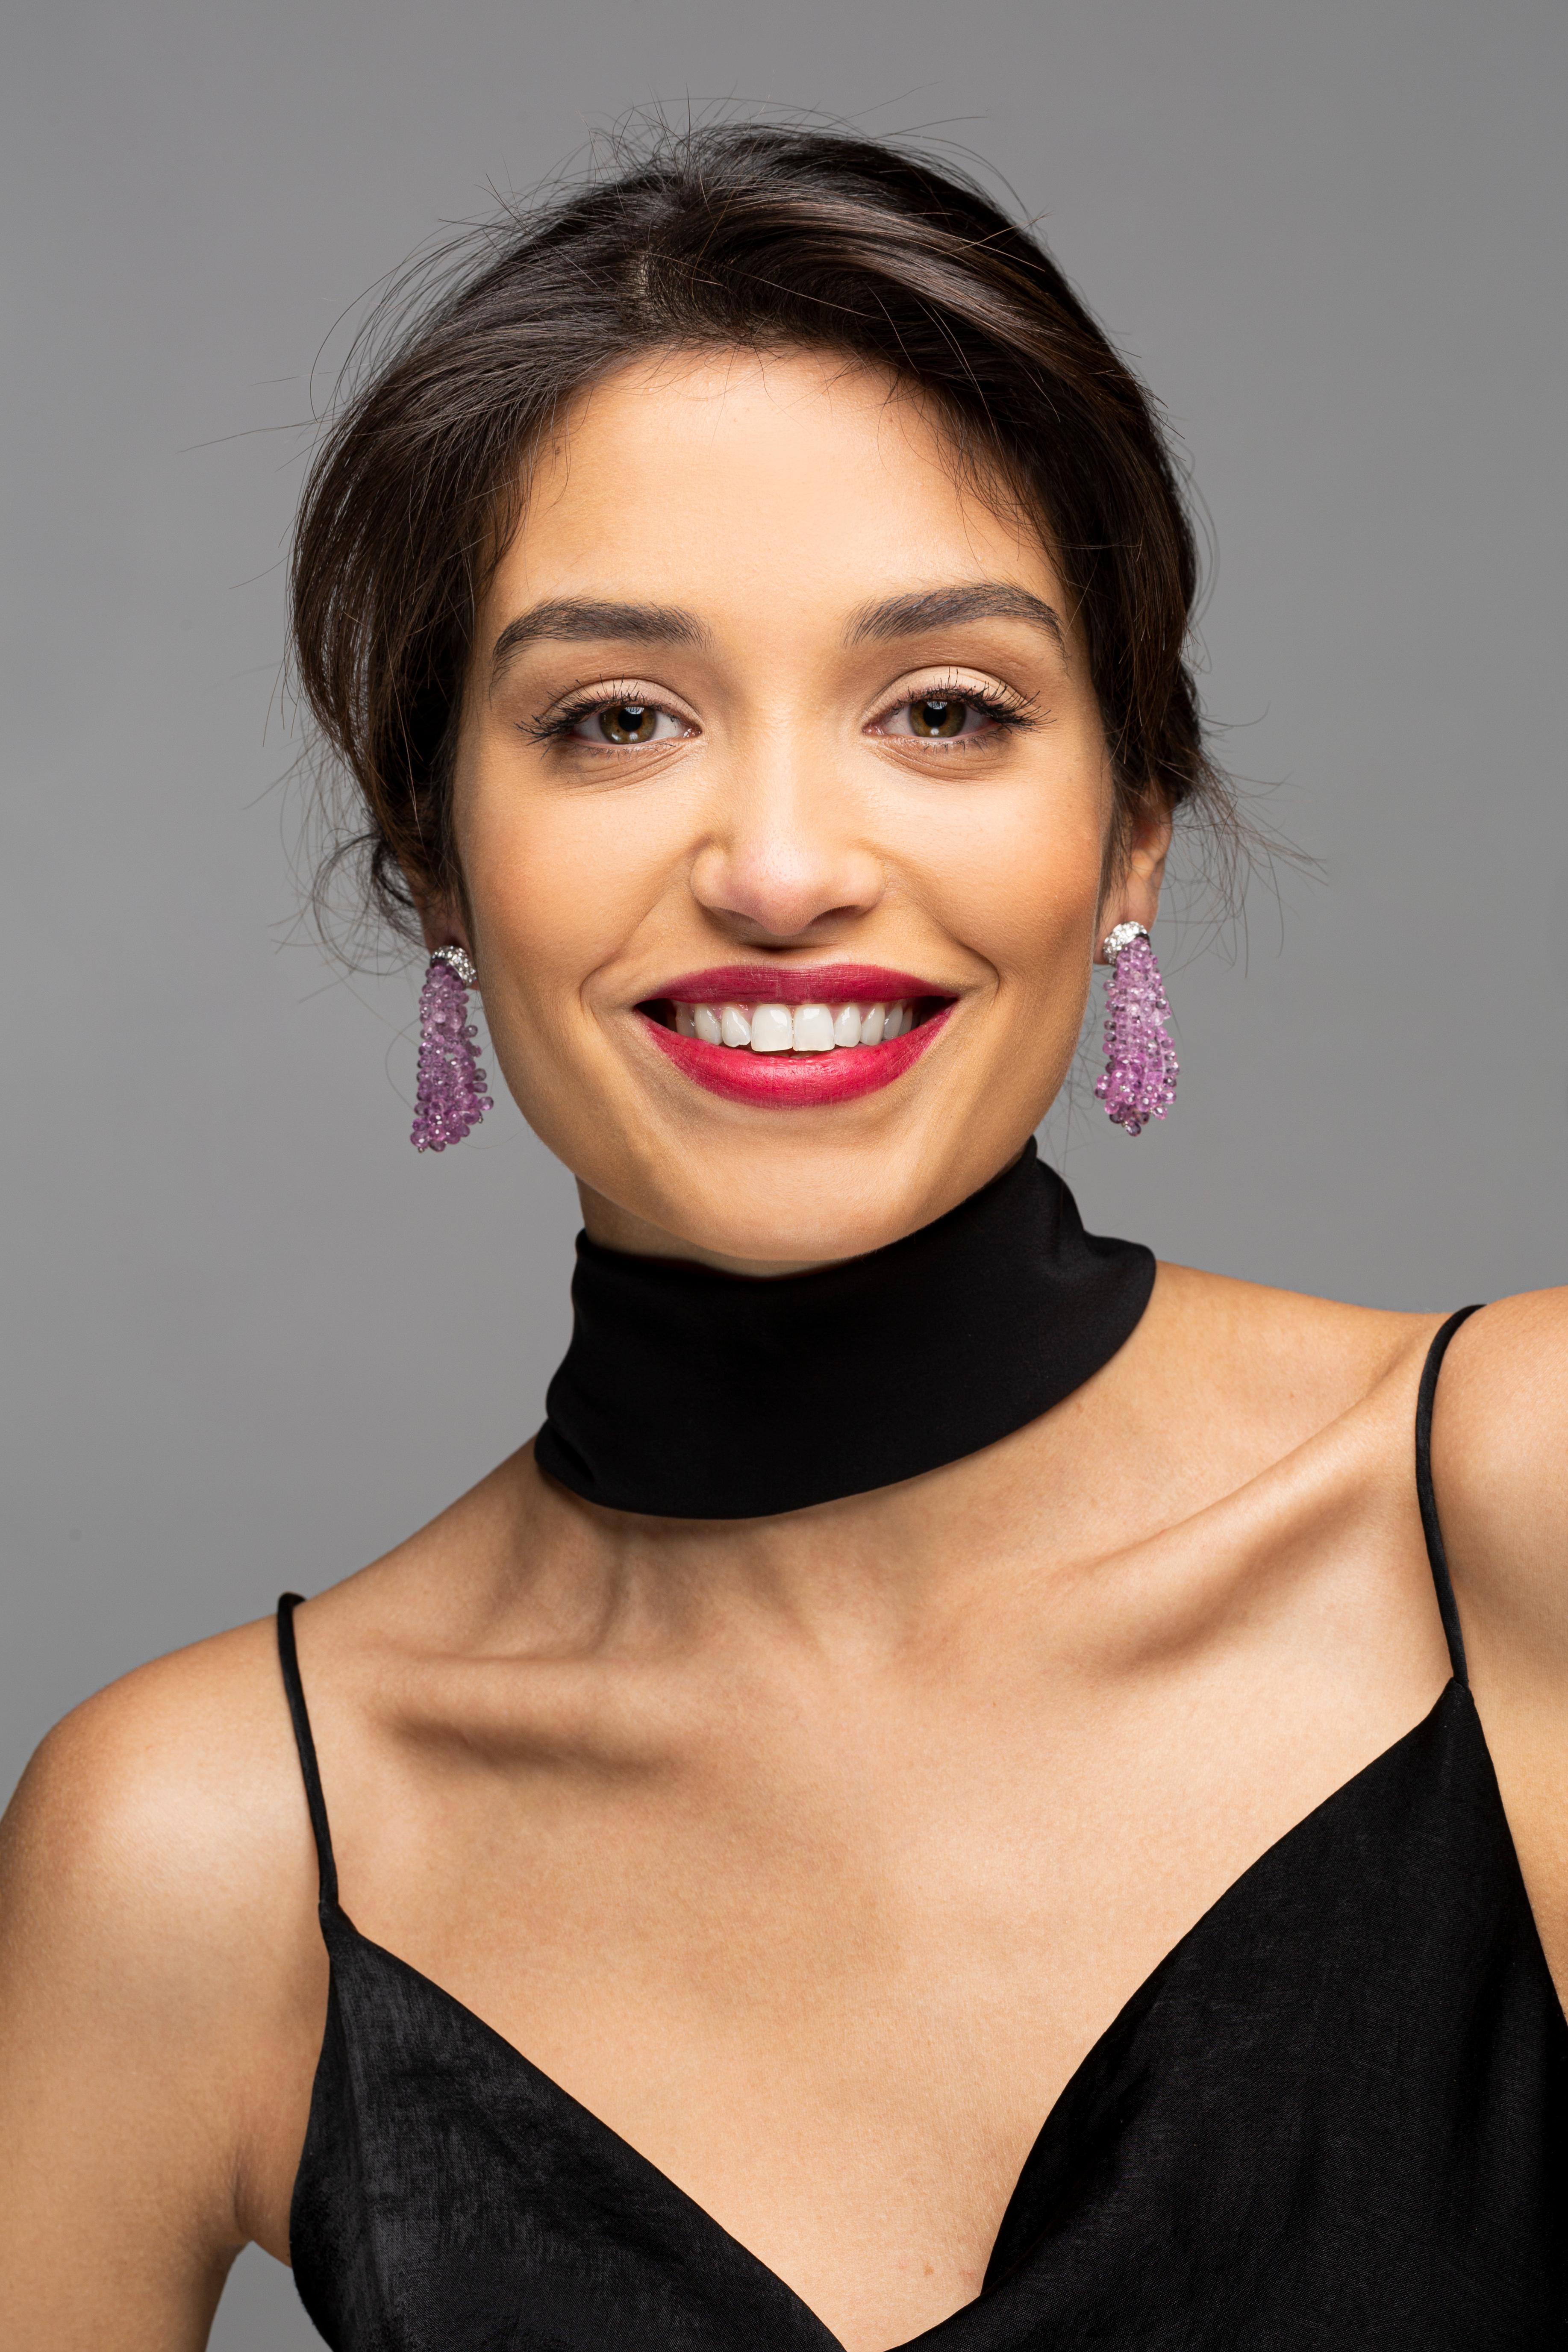 Alex Jona one-of-a-kind design, hand crafted in Italy, pair of chandelier earrings featuring clusters of briolette cut graduated pink sapphires for a total weight of 61.85 carats, sustained by a fine 18 karat white gold mounting set with 1.52 carats